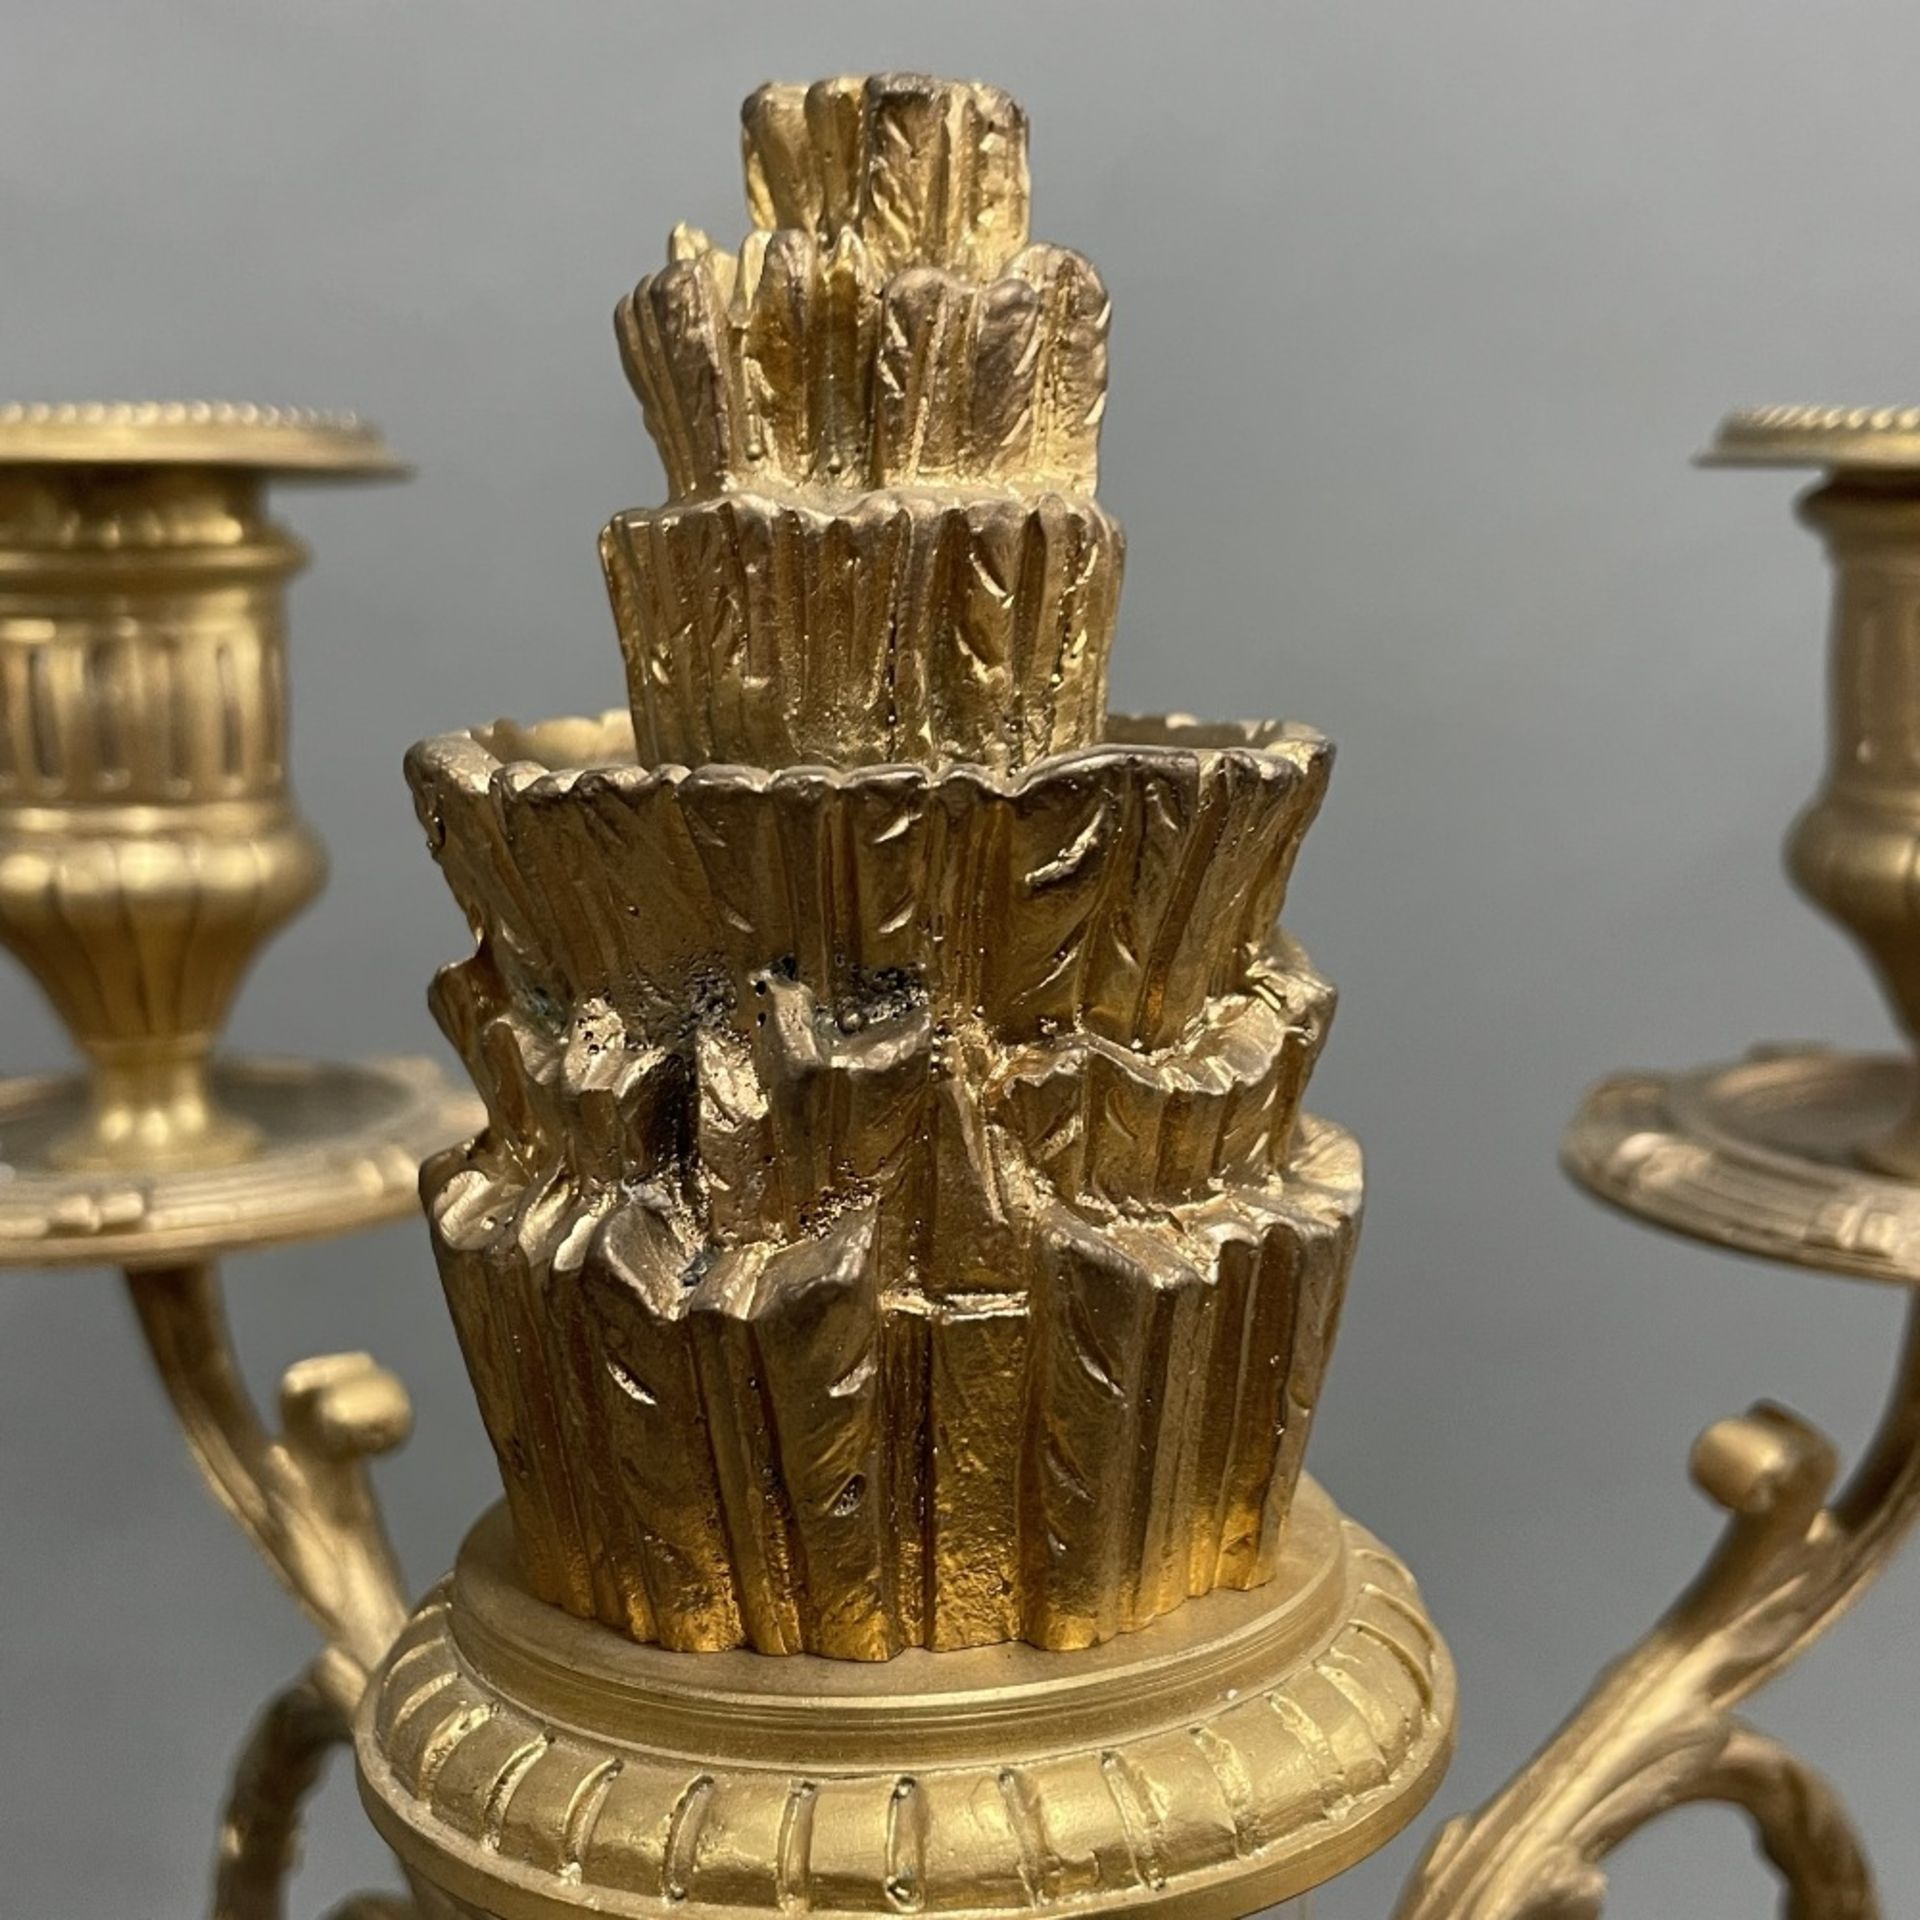 A pair of gilt bronze and rock crystal candelabra, H. 37cm, one sconce missing. - Image 3 of 3